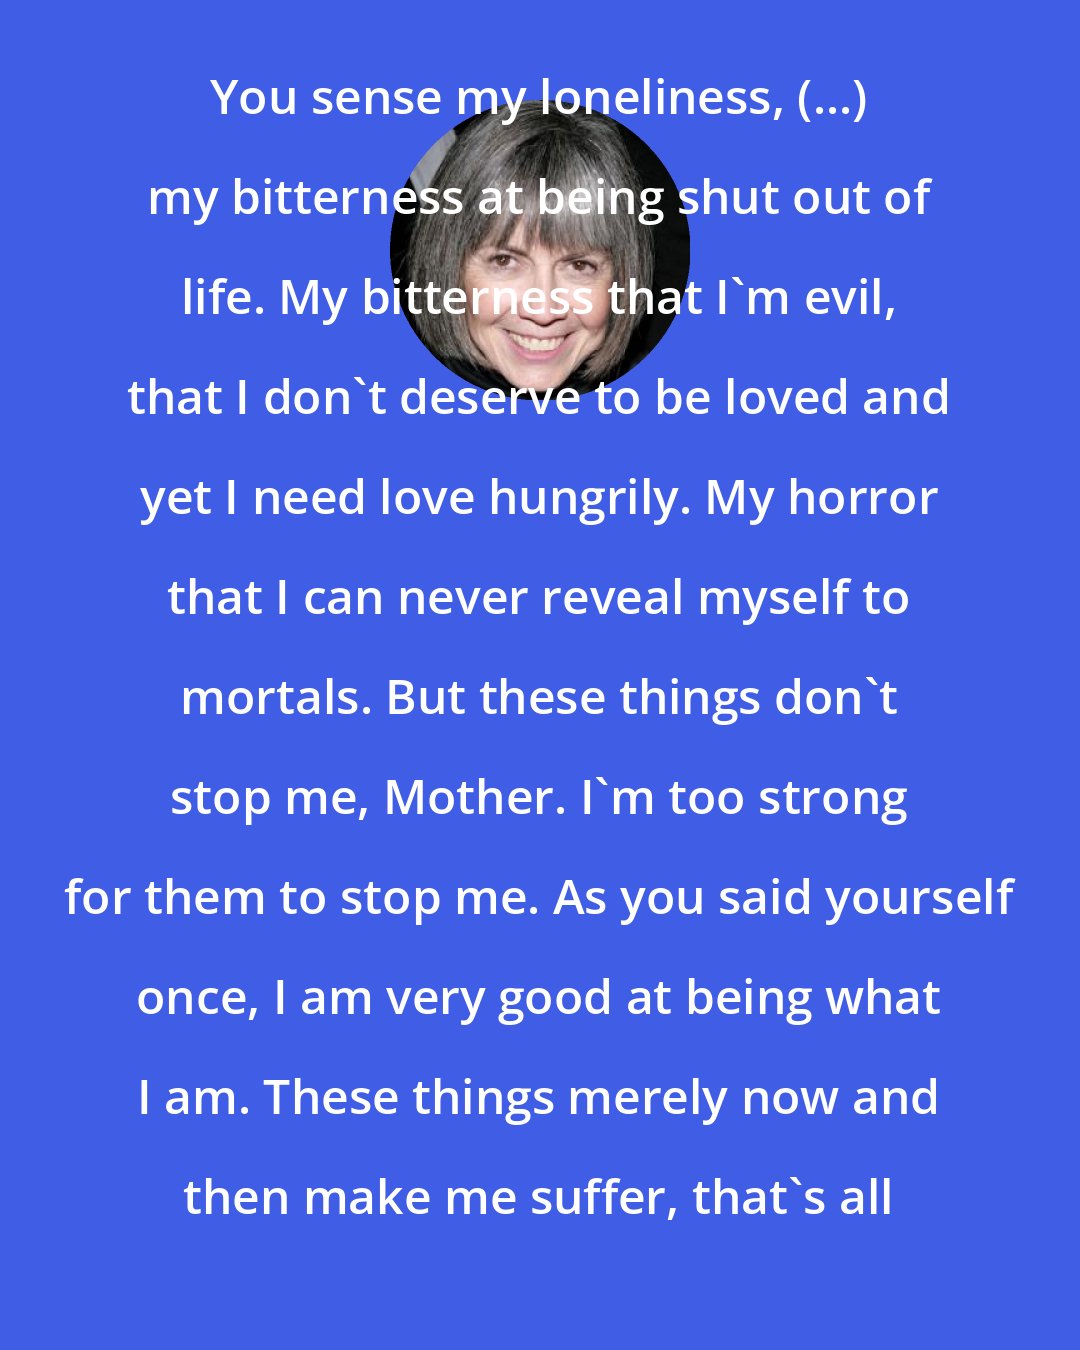 Anne Rice: You sense my loneliness, (...) my bitterness at being shut out of life. My bitterness that I'm evil, that I don't deserve to be loved and yet I need love hungrily. My horror that I can never reveal myself to mortals. But these things don't stop me, Mother. I'm too strong for them to stop me. As you said yourself once, I am very good at being what I am. These things merely now and then make me suffer, that's all